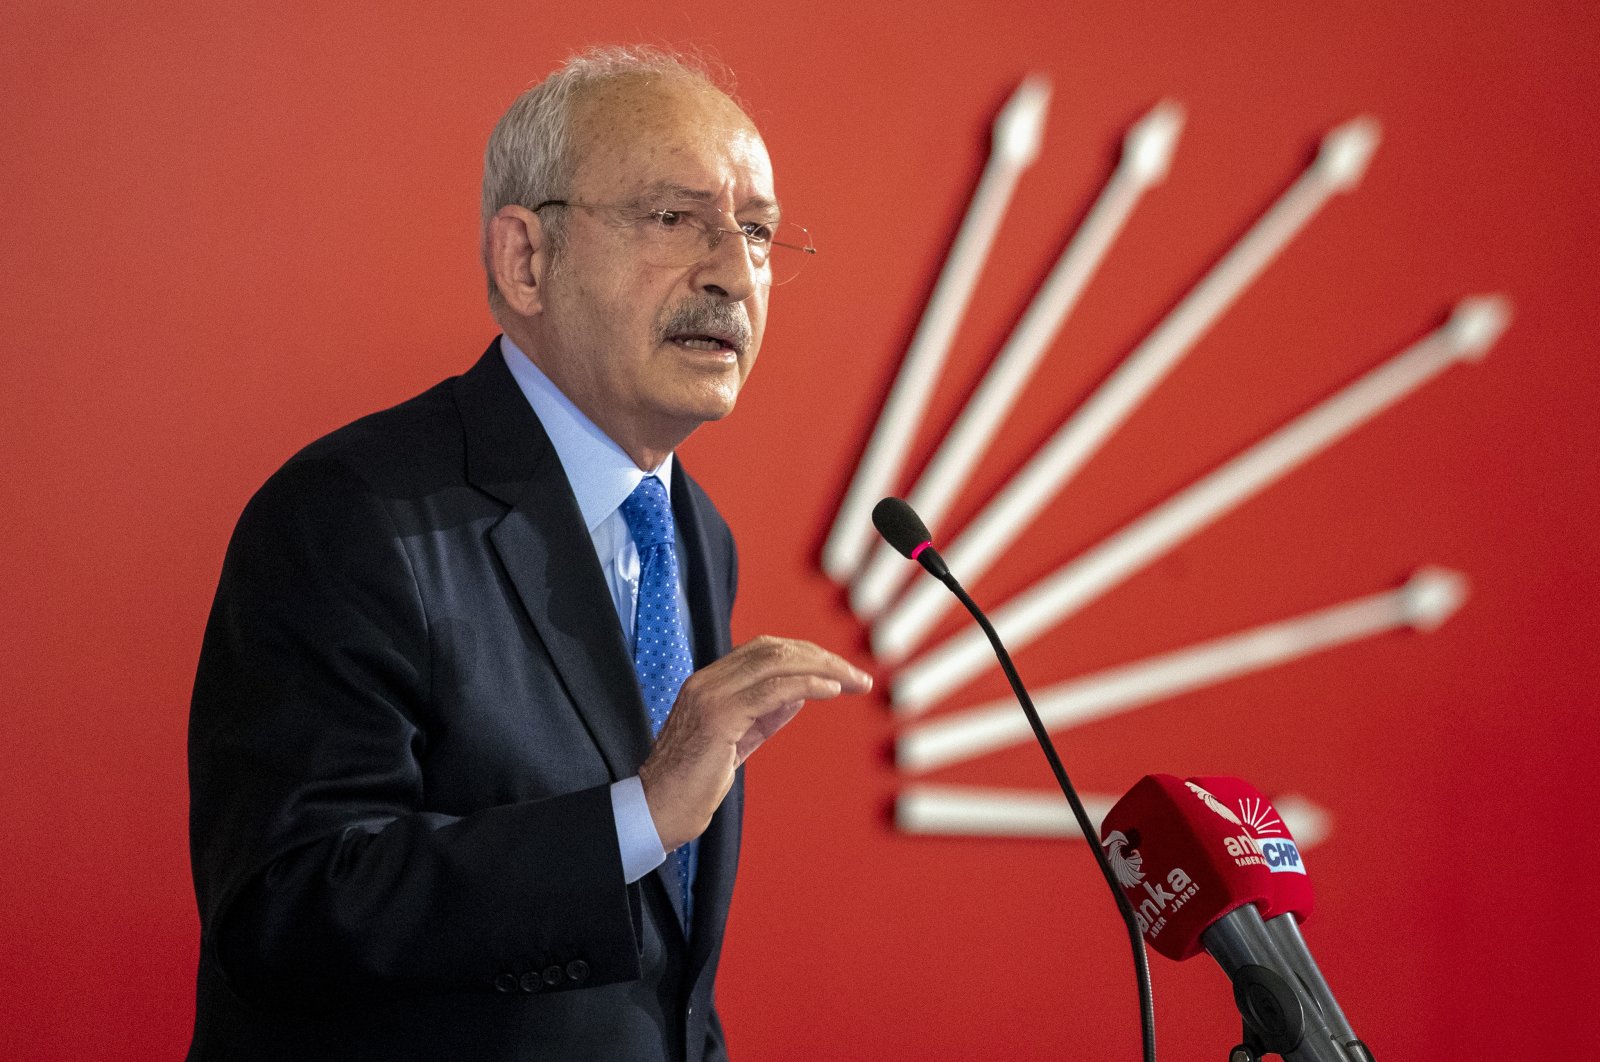 Main opposition Republican People's Party (CHP) Chairperson Kemal Kılıçdaroğlu speaks at a meeting with farmers at the CHP headquarters in Ankara on Feb. 3, 2021. (AA Photo)